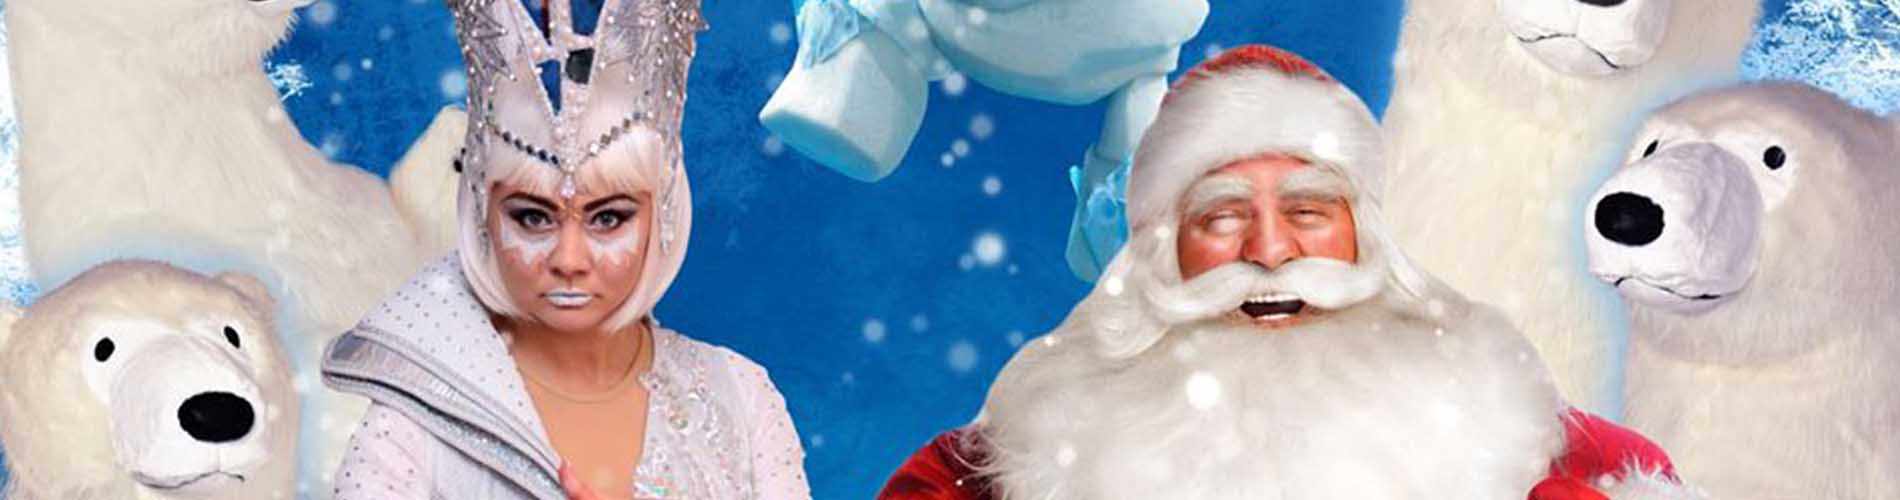 The Impressive Show, "Christmas and the Snow Queen Circus Show" is coming to Cyprus